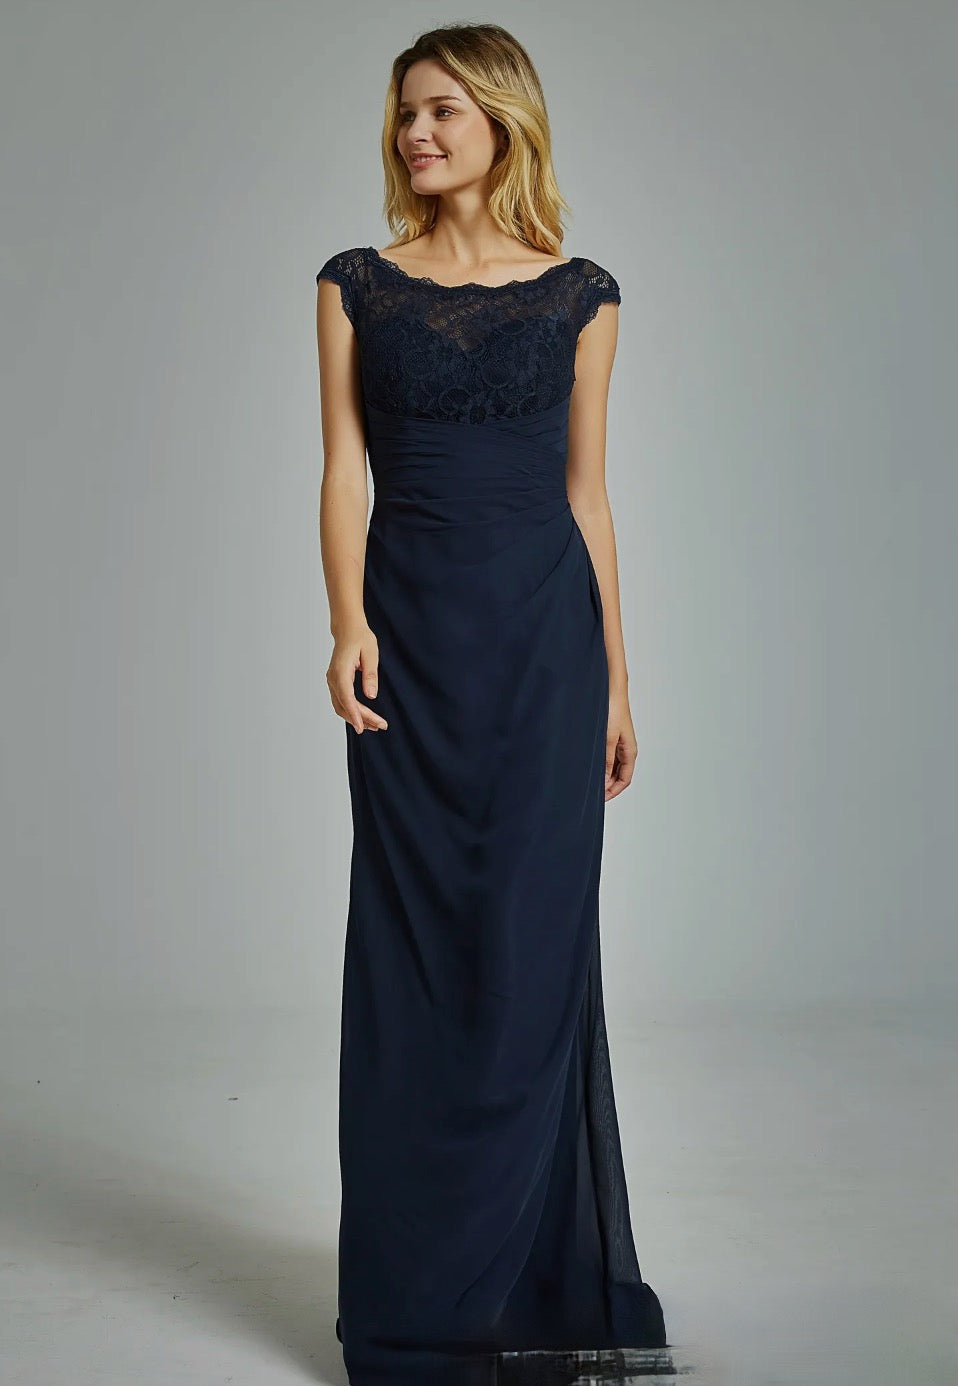 Chiffon Cap Sleeves Bridesmaid Dress with Ruched Bodice